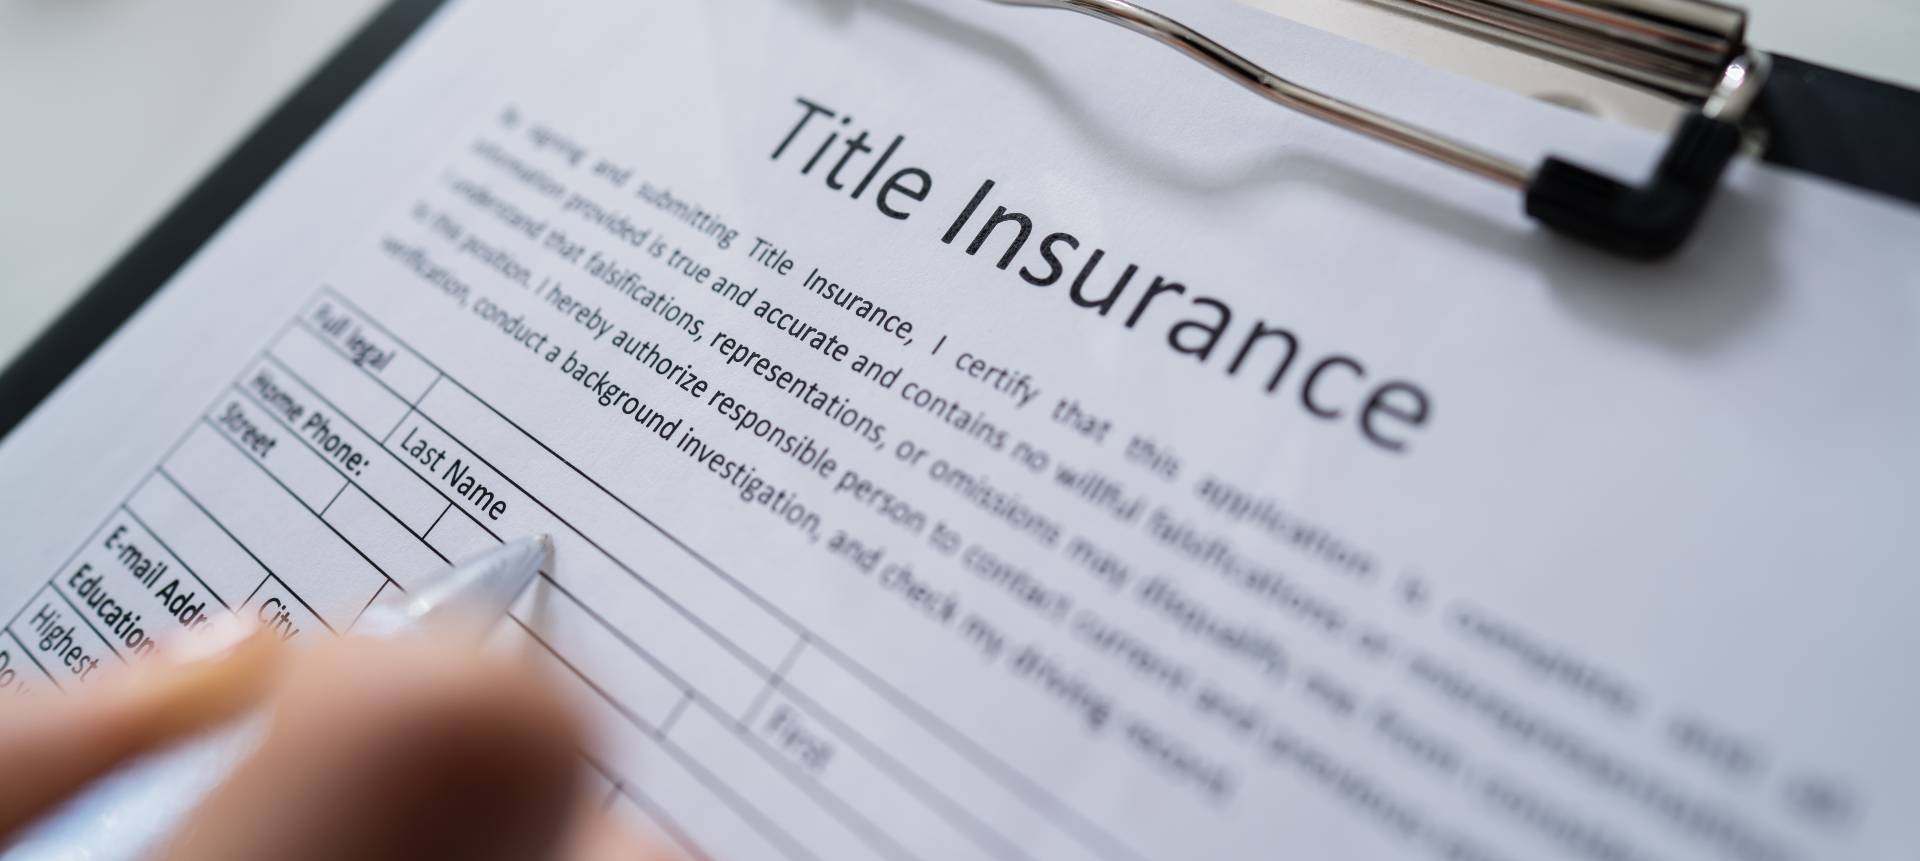 Woman Filling Title Insurance Form Over White Desk